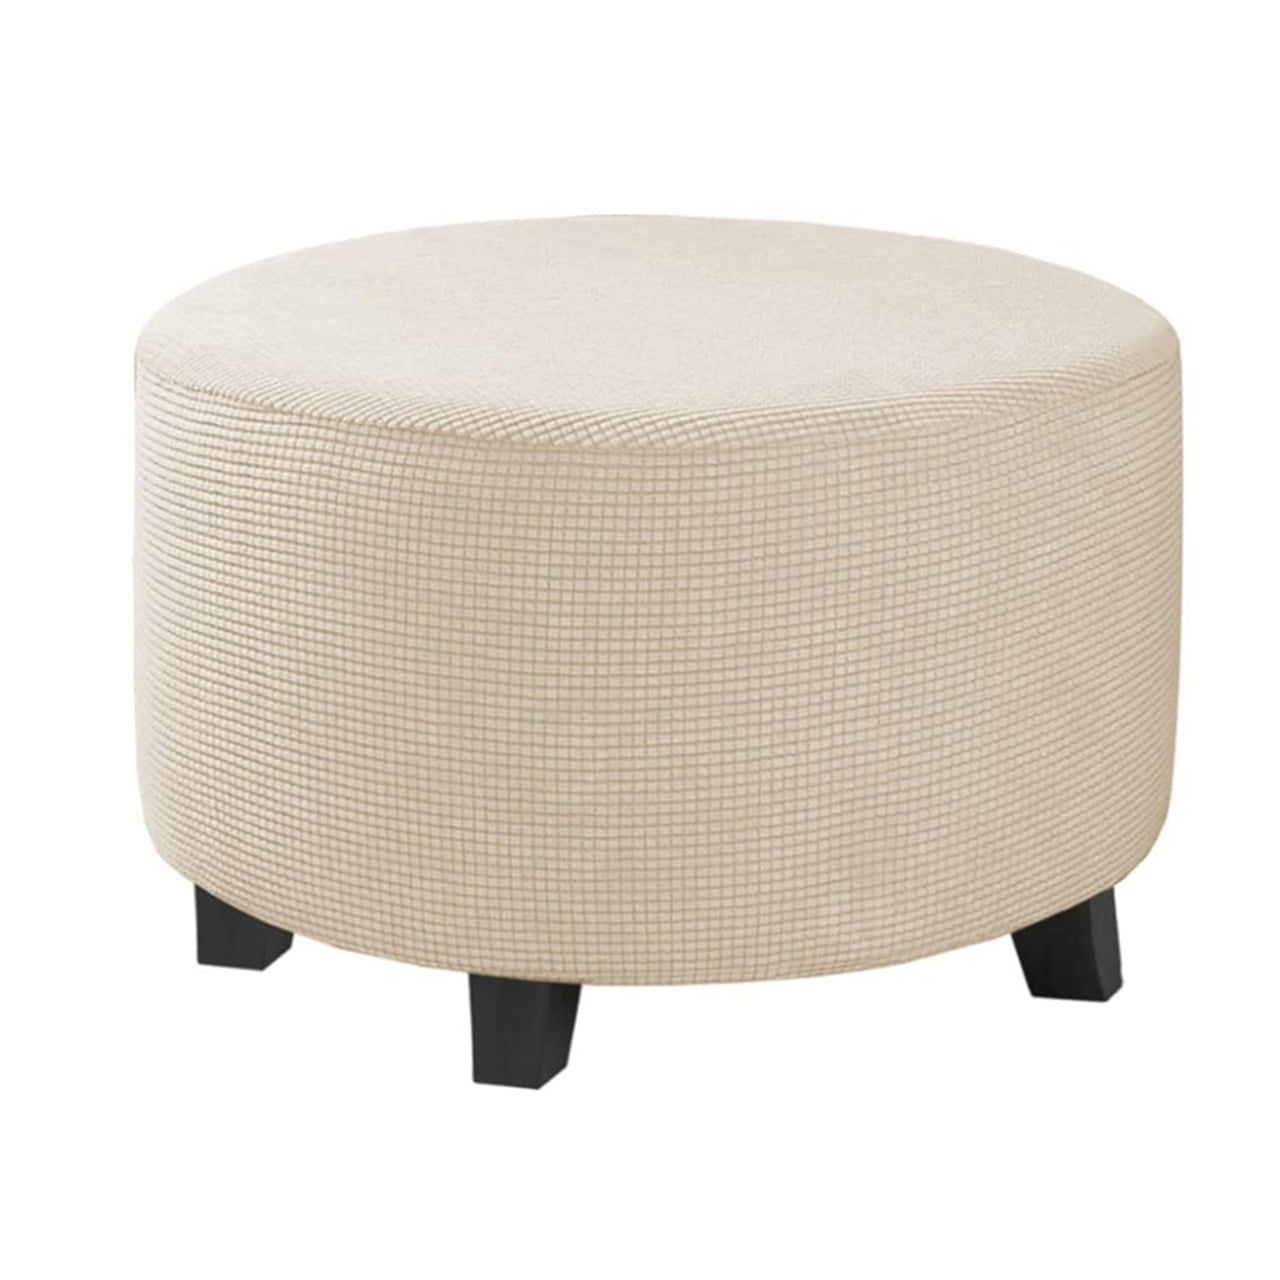 Elastic Stretchy Fabric Ottoman Cover Home Furniture Footstool Protect Slipcover 